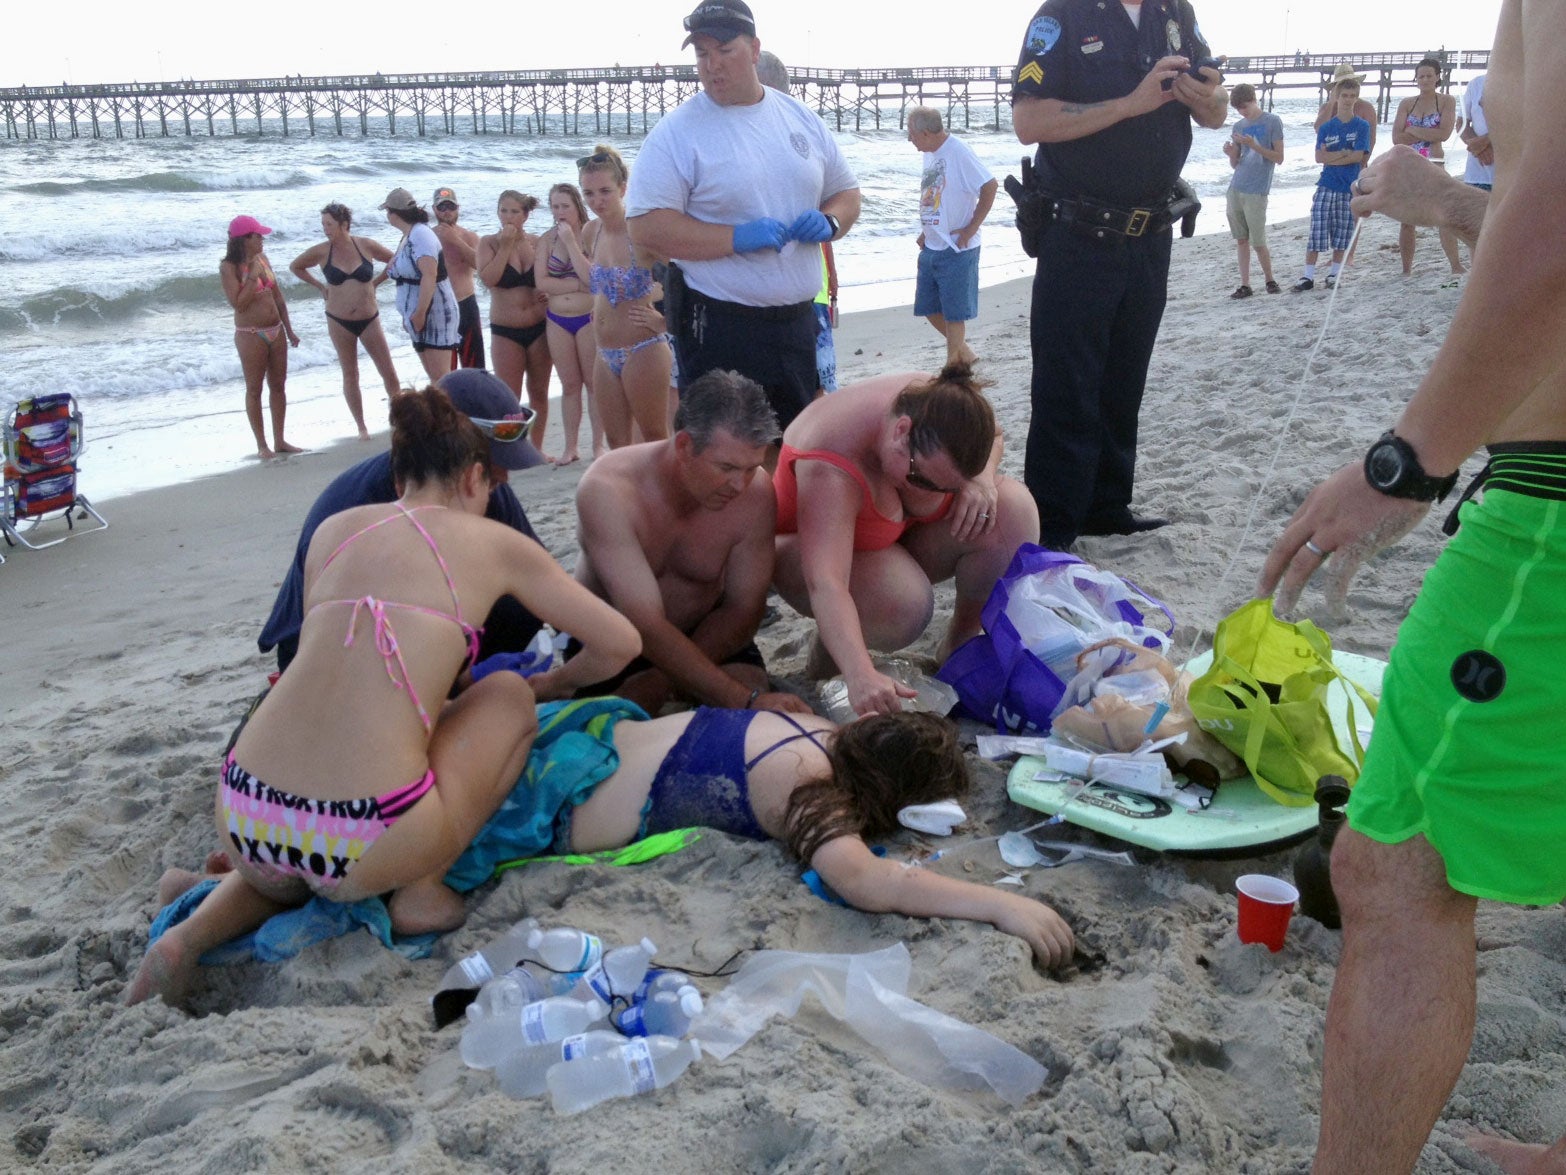 Emergency aid is given to a 14-year-old girl who was attacked by a shark off a beach in North Carolina 